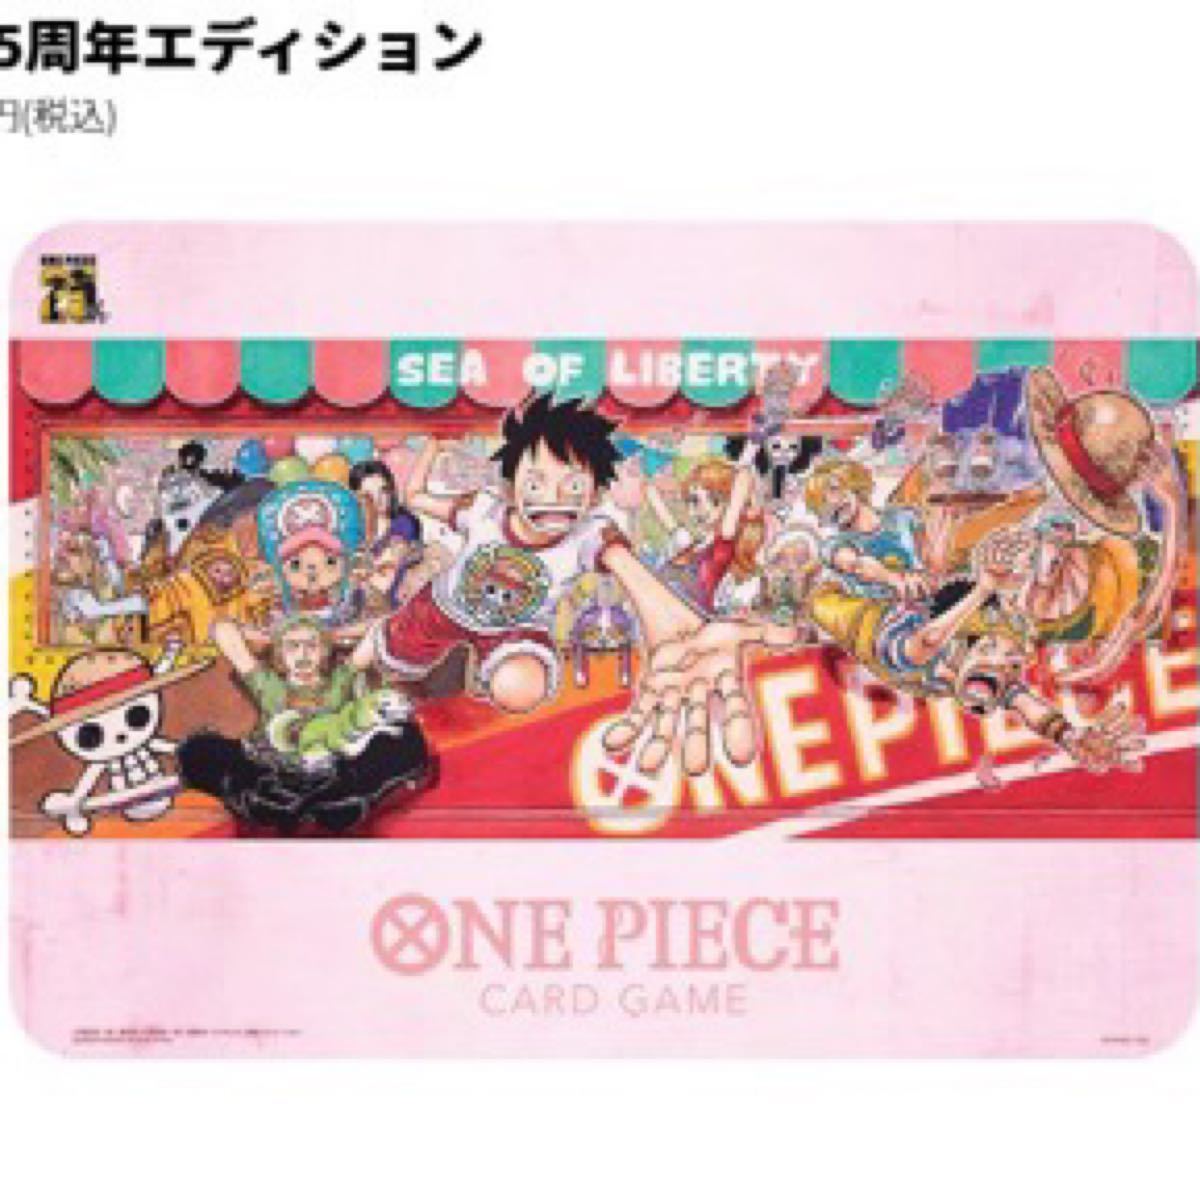 meet the ONE PIECE CARD アクリル 25周年 セット販売